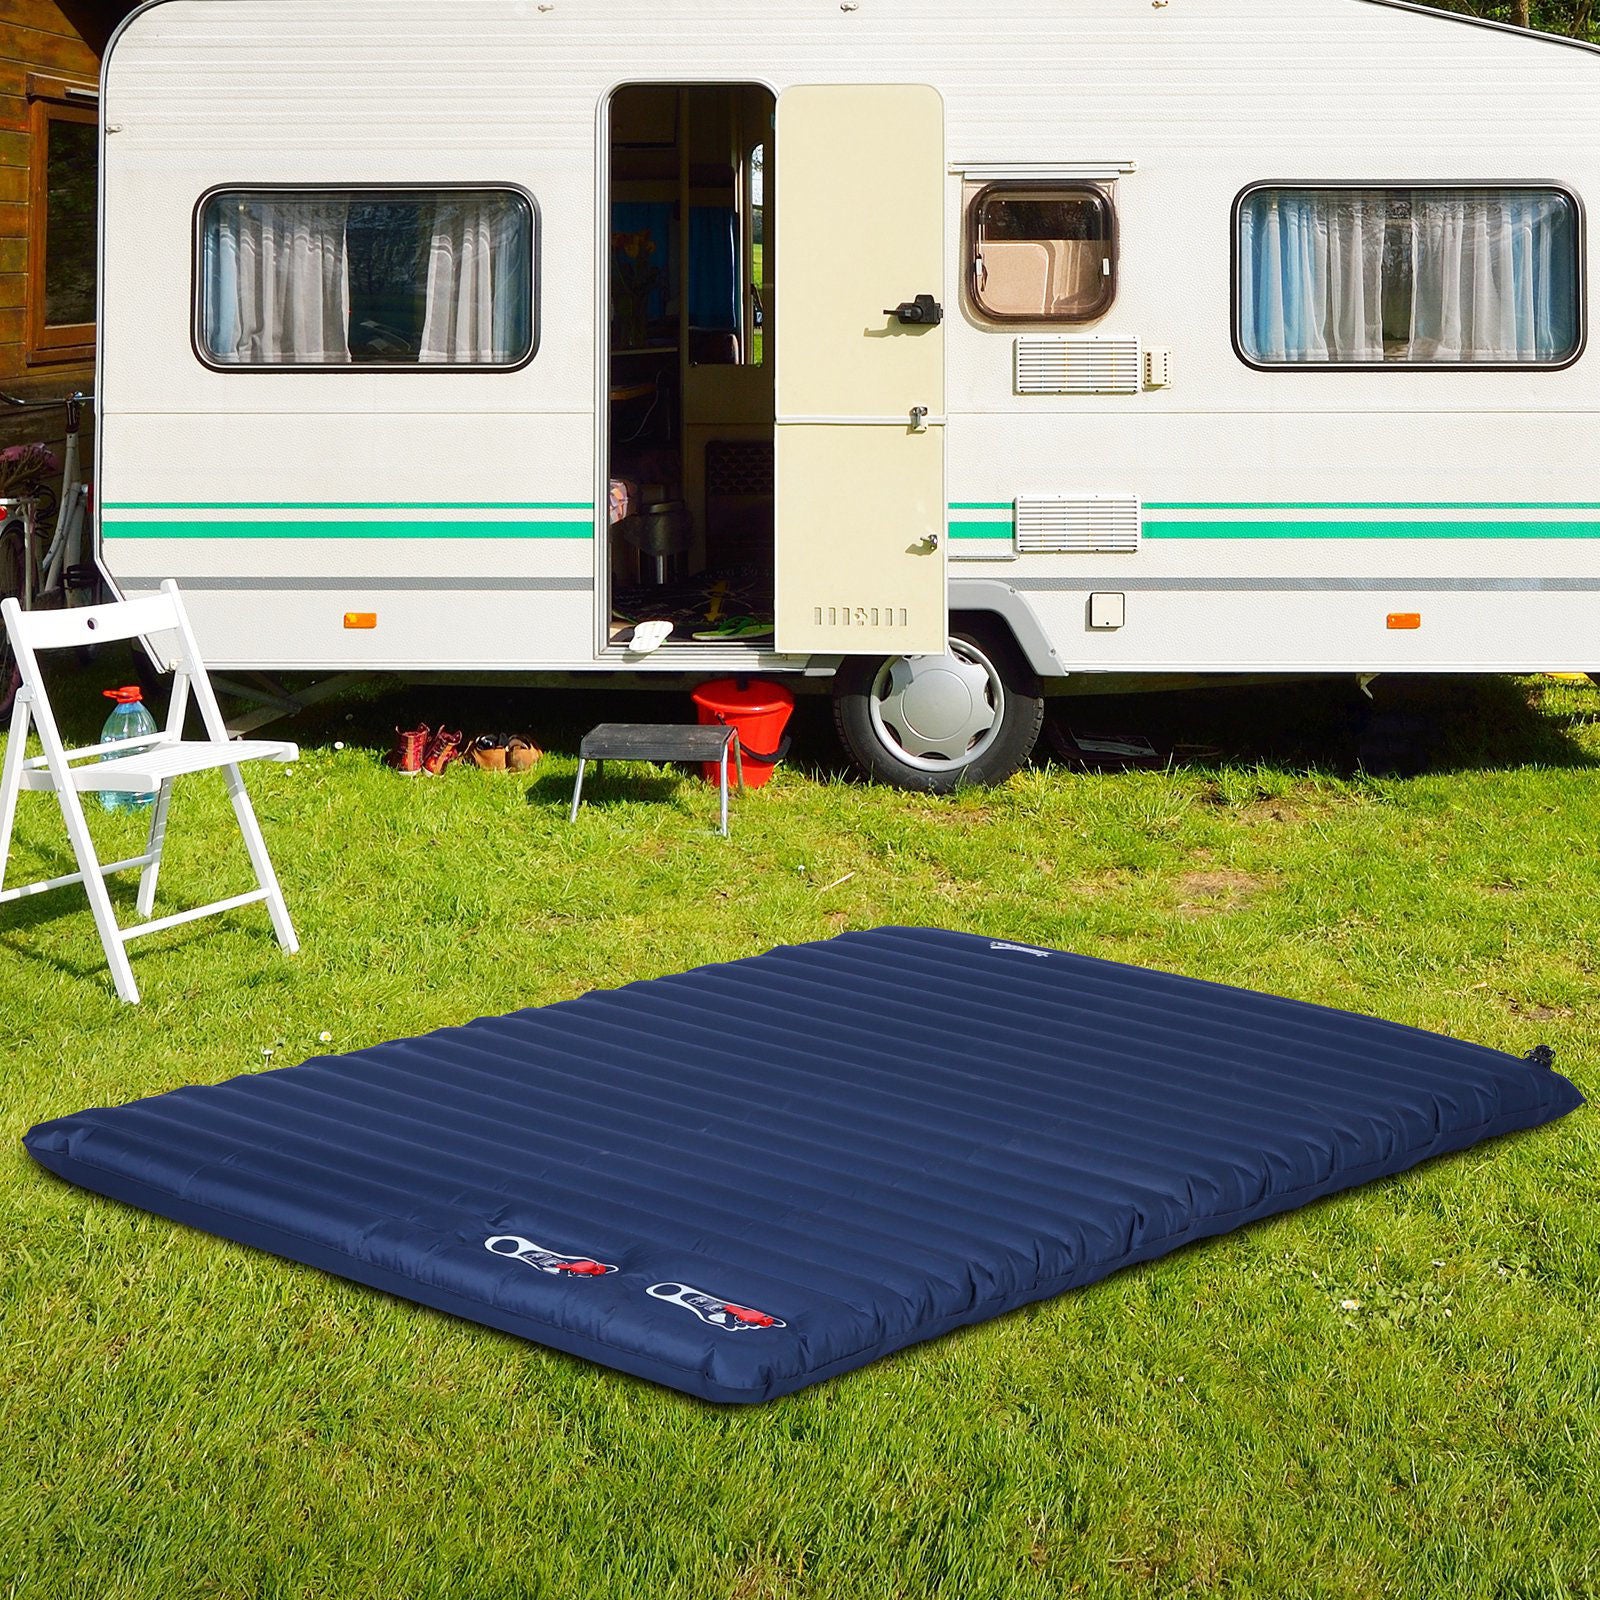 Nancy's Amulree Luchtbed Luchtbed Camping - Blauw - Polyester, Pongee, Pvc - 76,77 cm x 54,33 cm x 3,93 cm